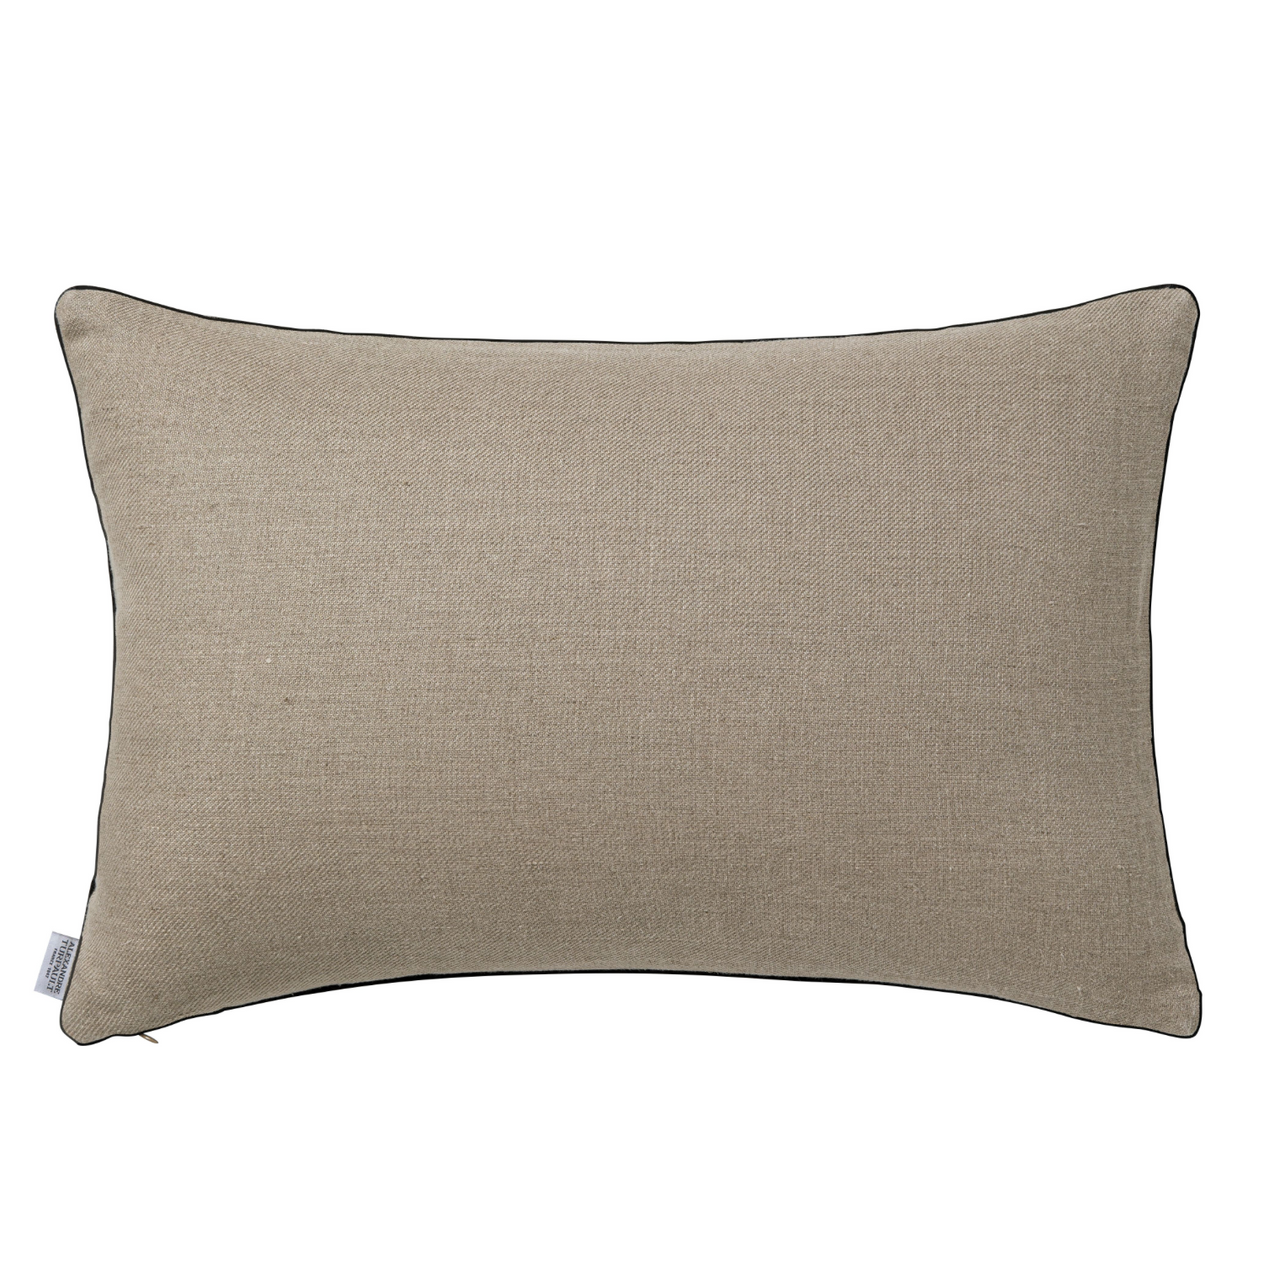 voltaire cushion cover by alexandre turpault by adorn.house